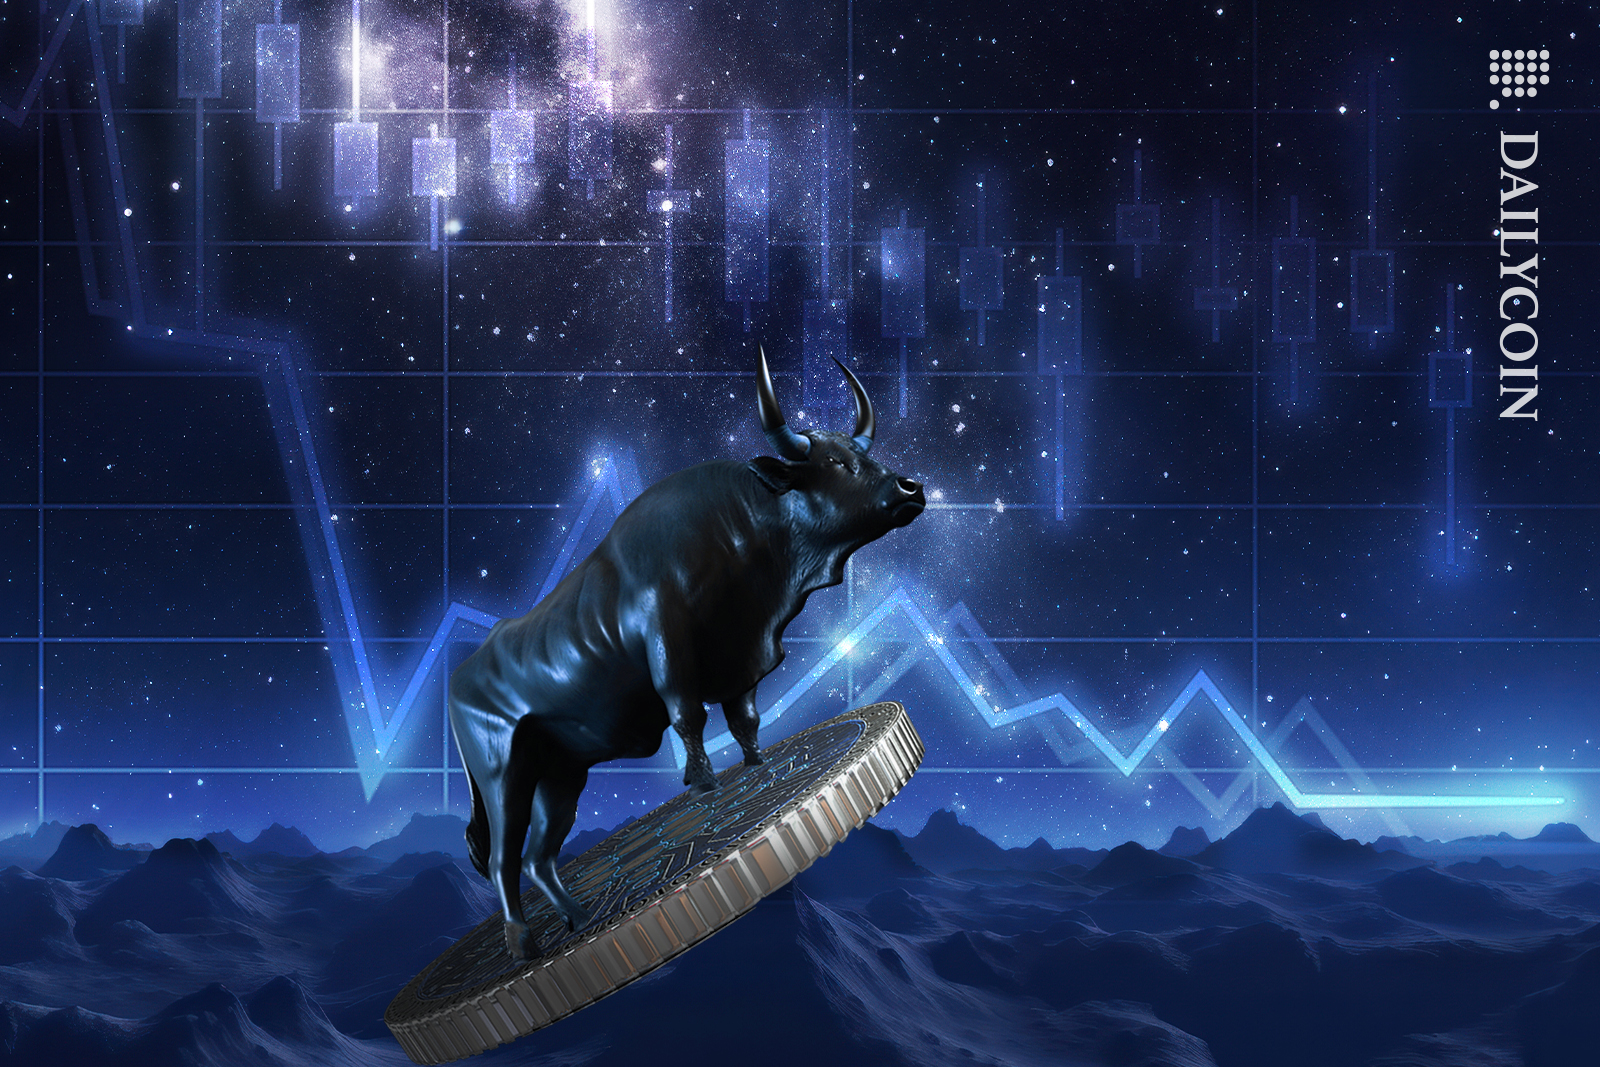 Bull tilting the Cardano coin backwards watching the ADA chart in the starry night going down.